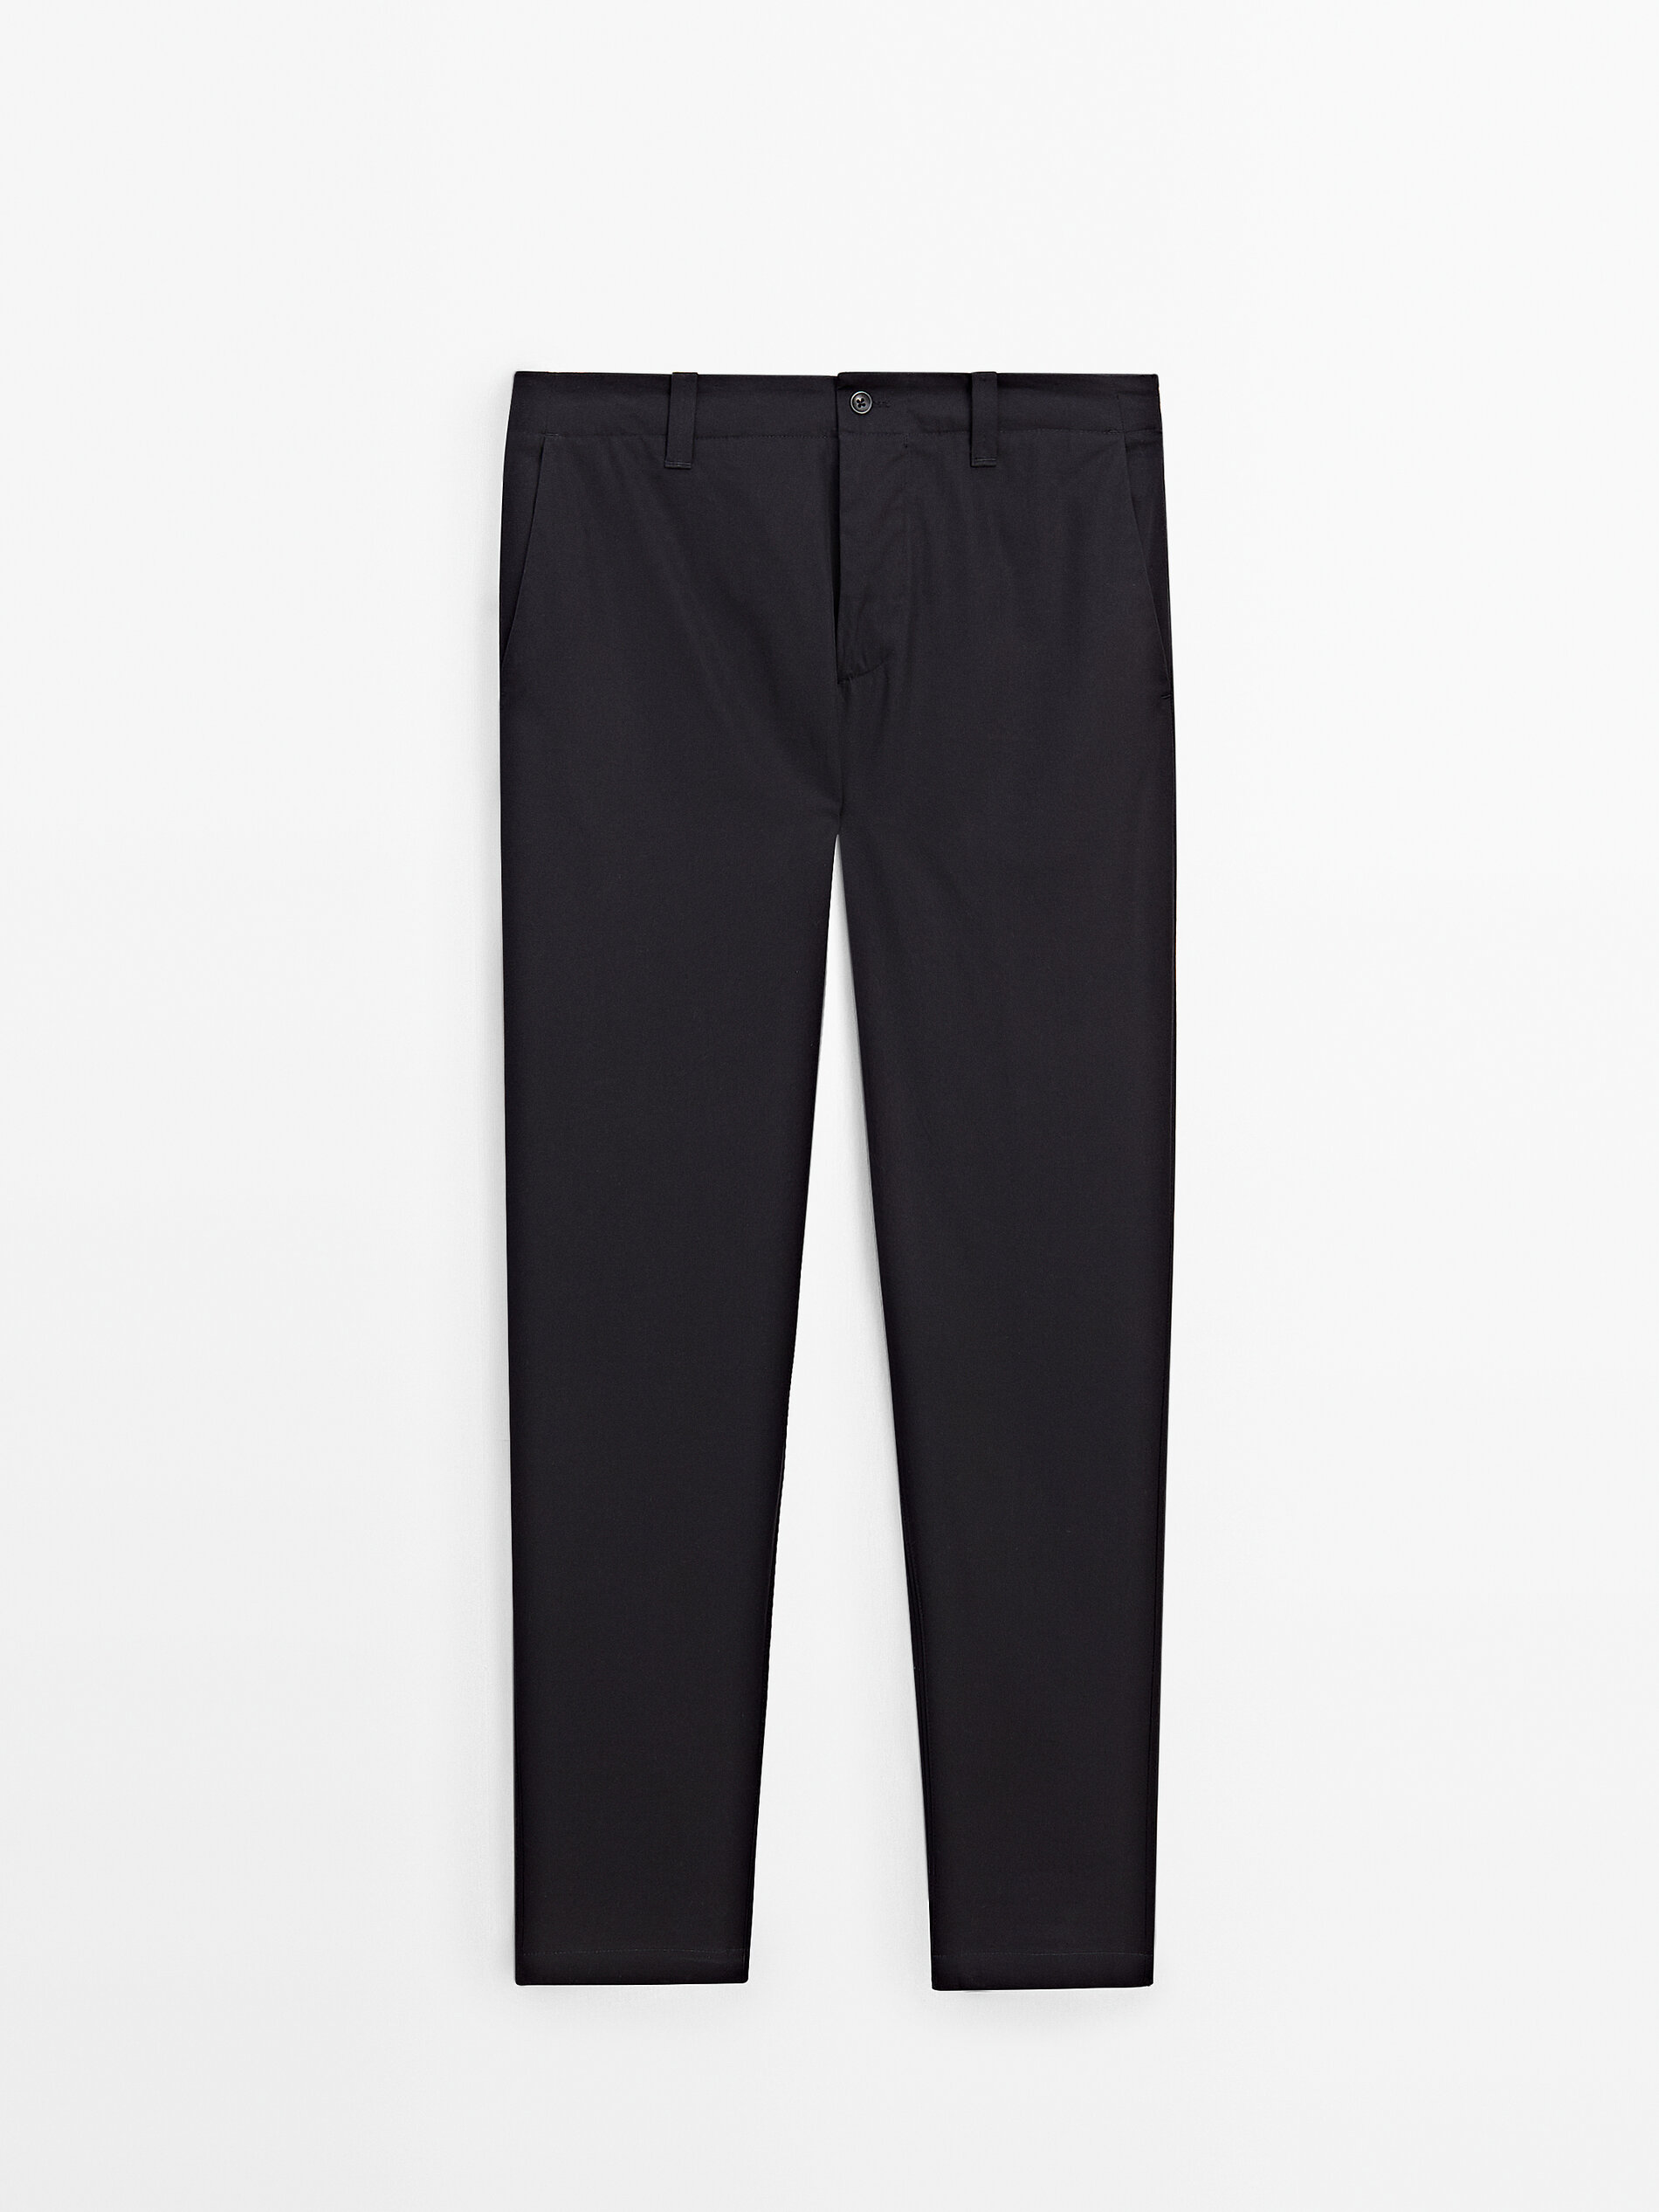 Paul Smith - Slim-Fit Cotton-Blend Twill Trousers - Black Paul Smith